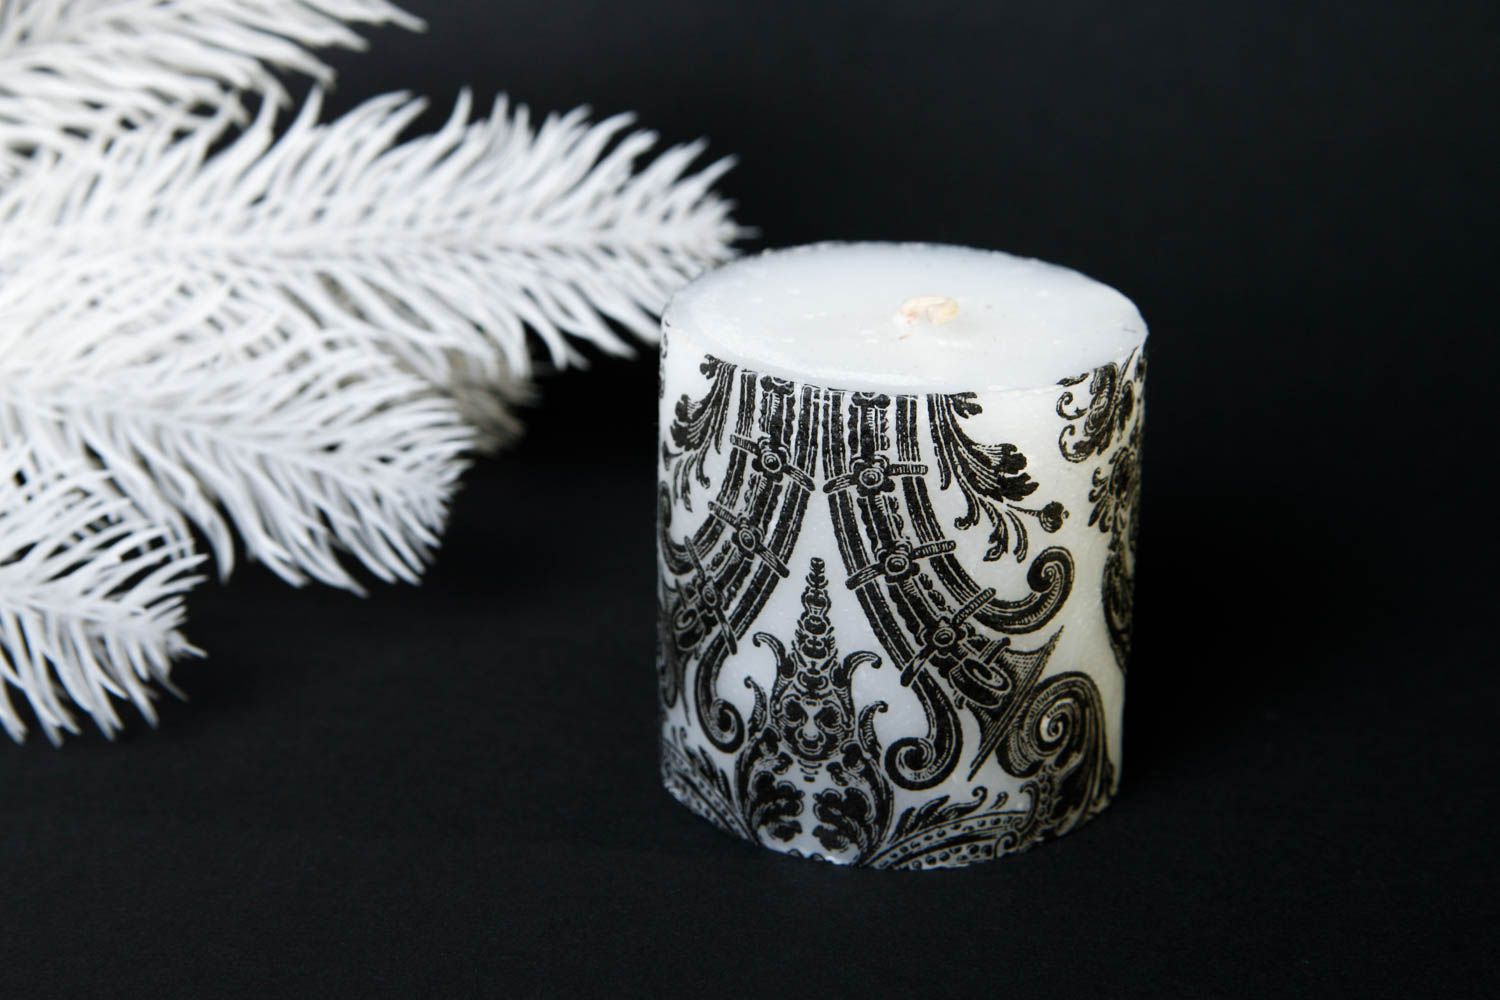 Beautiful handmade paraffin candle festive candles candle art gift ideas photo 1